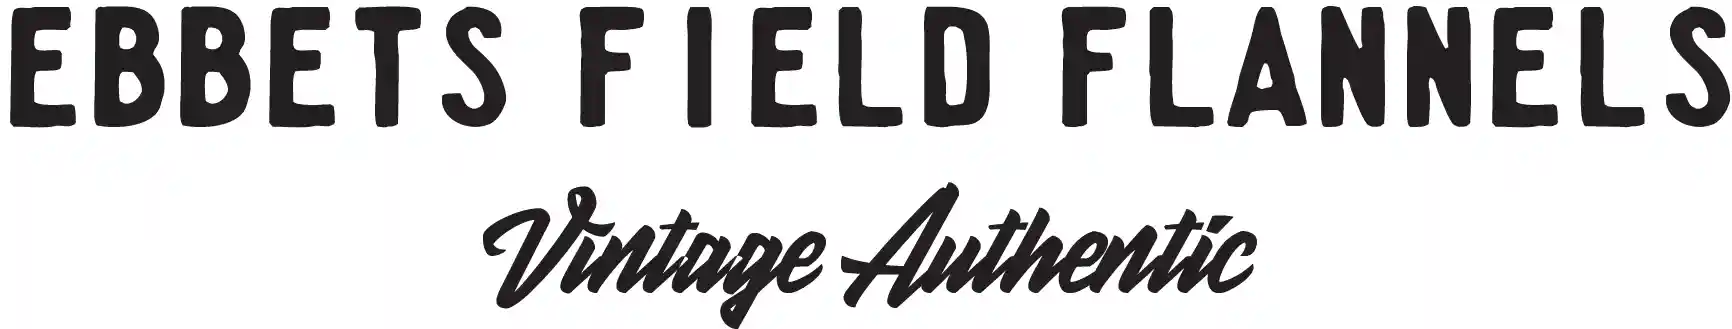 Grab 20% Discount Site-wide At Ebbets Field Flannels